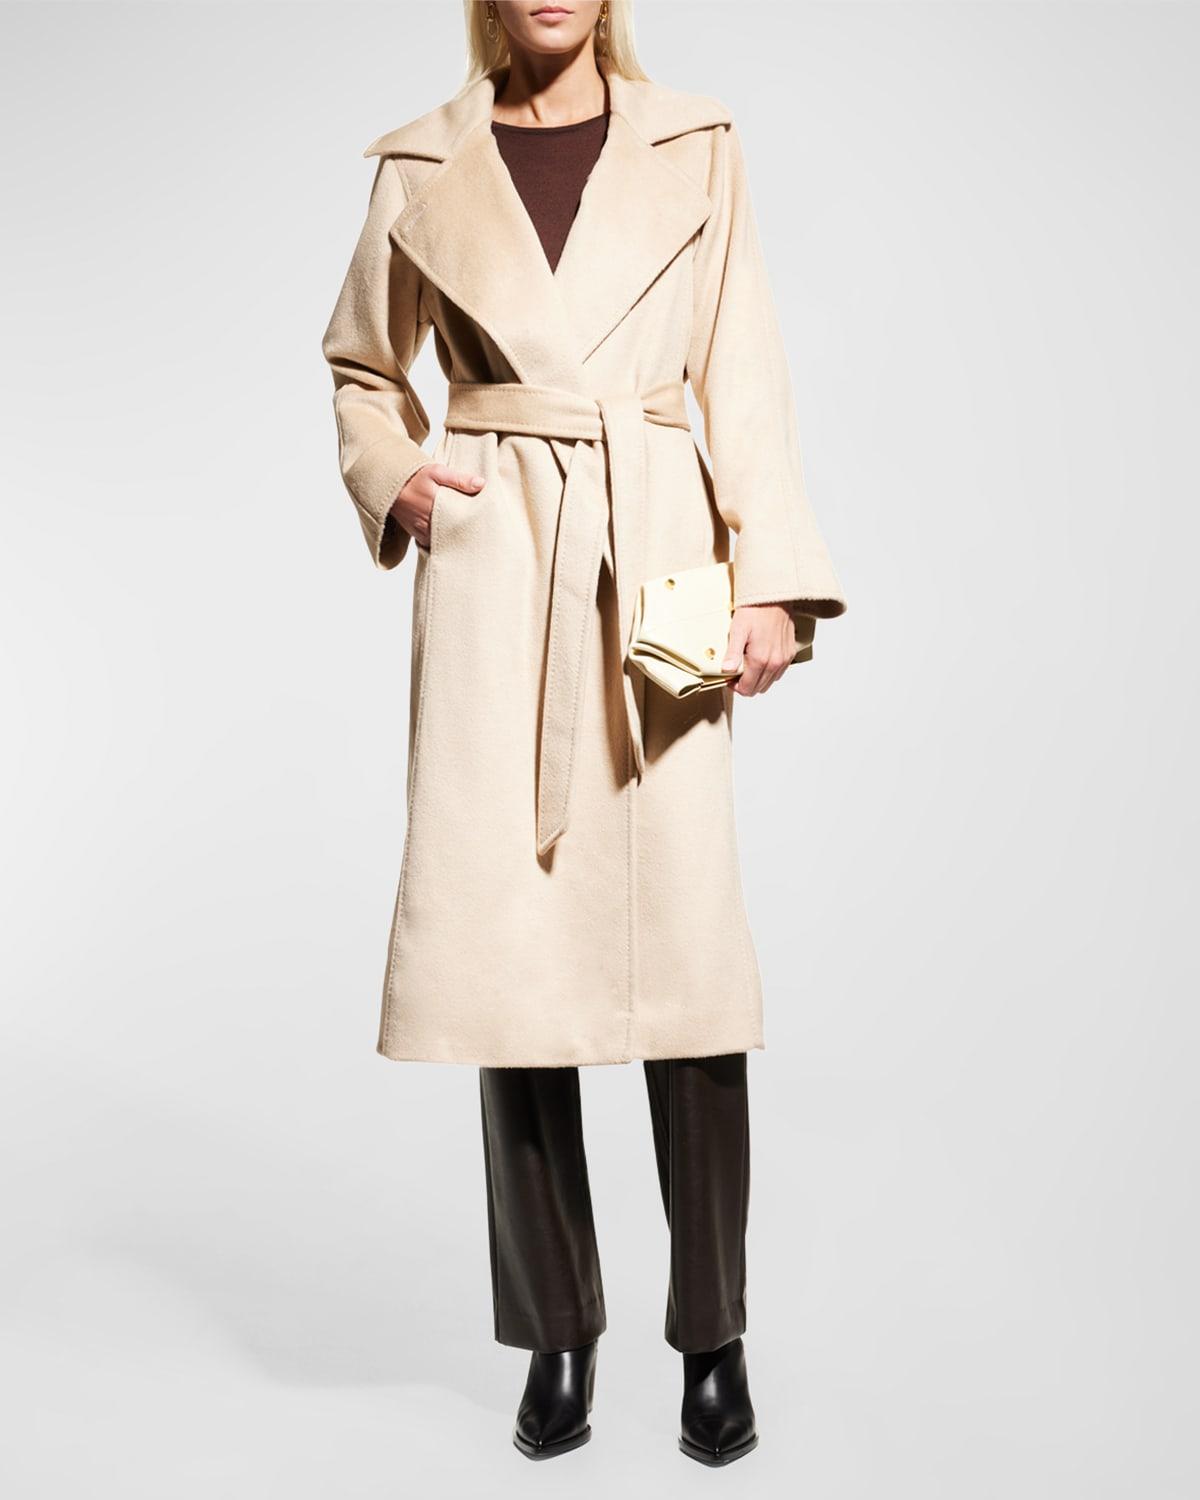 Sofia Cashmere Camel Hair Belted Wrap Coat in Natural | Lyst